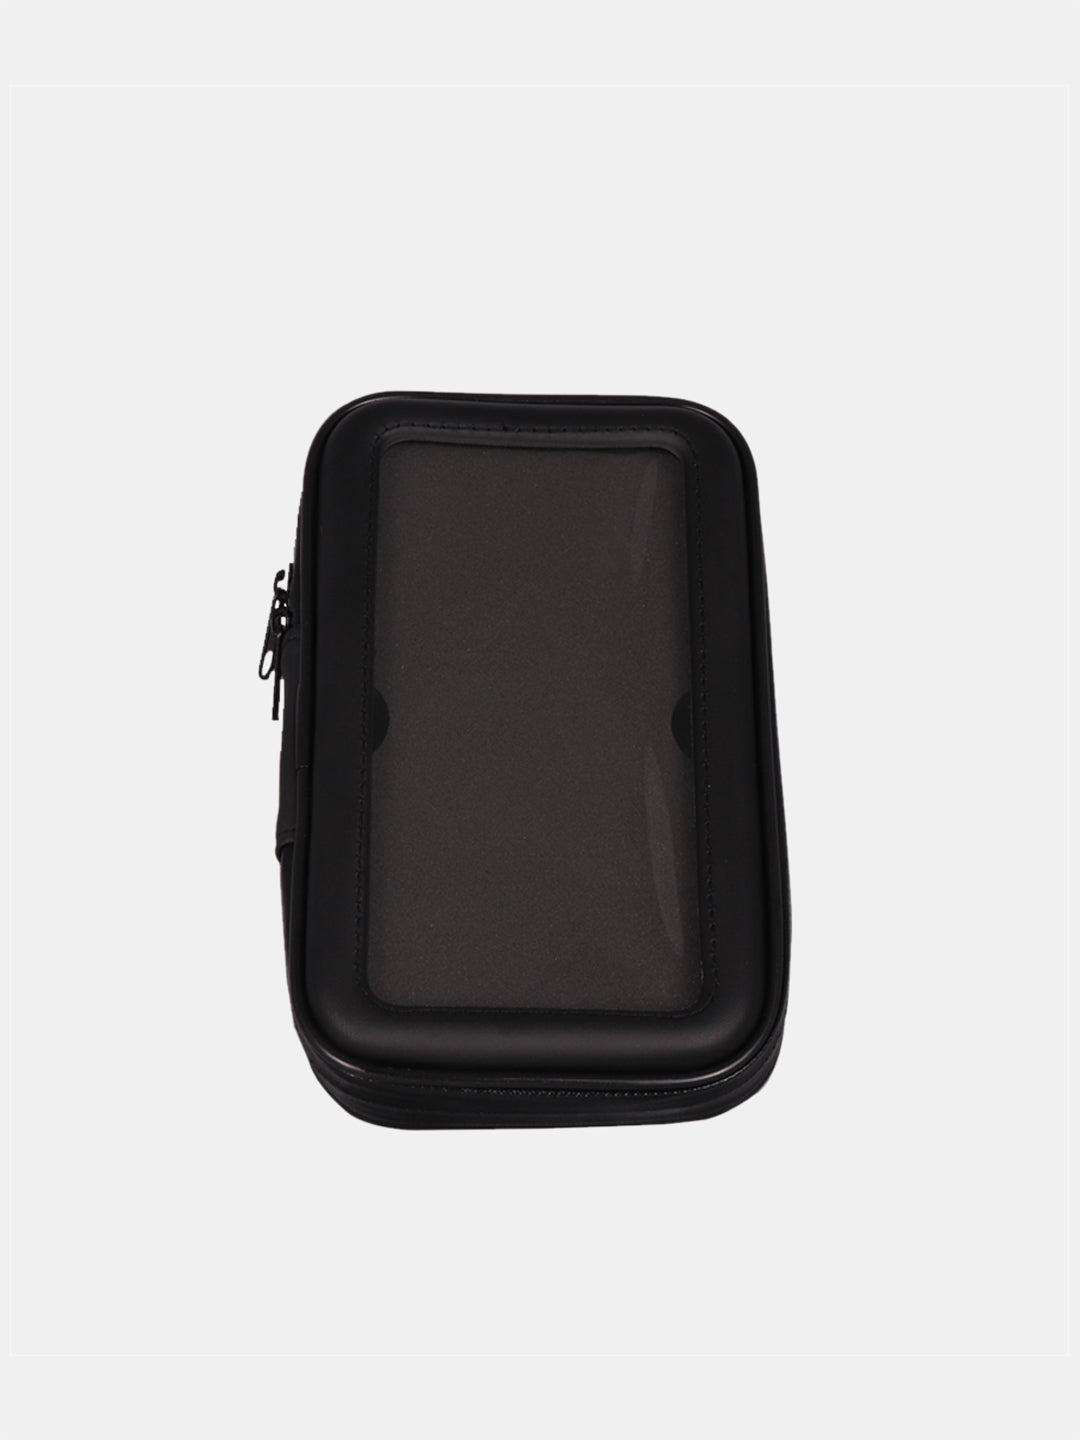 Mobile Holder Pouch